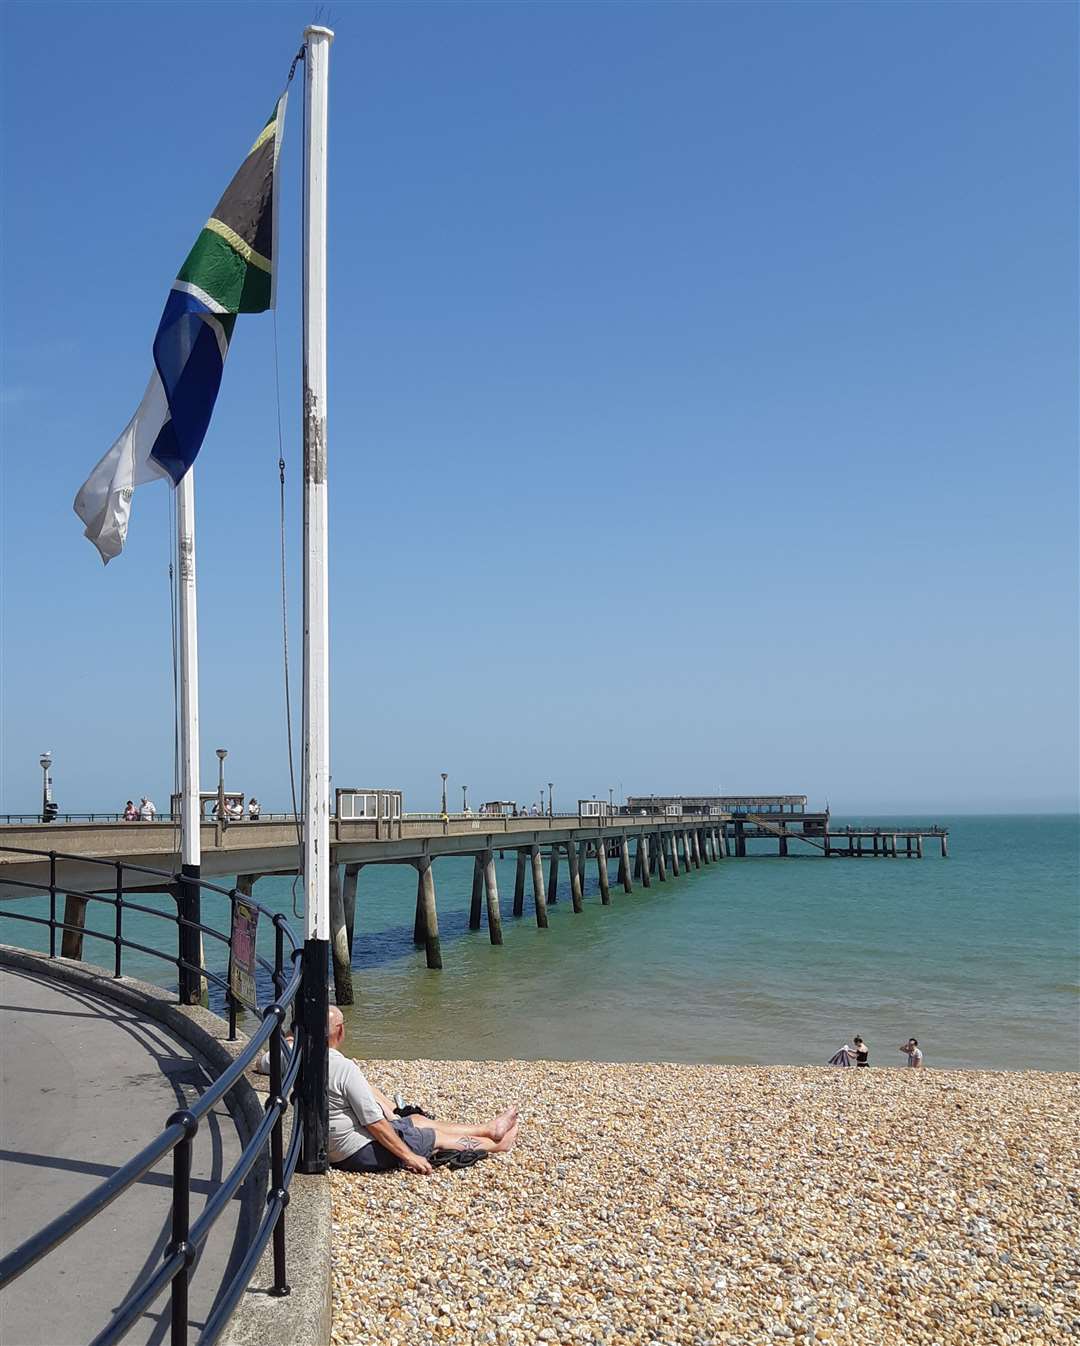 Deal beach was rated the best in the United Kingdom